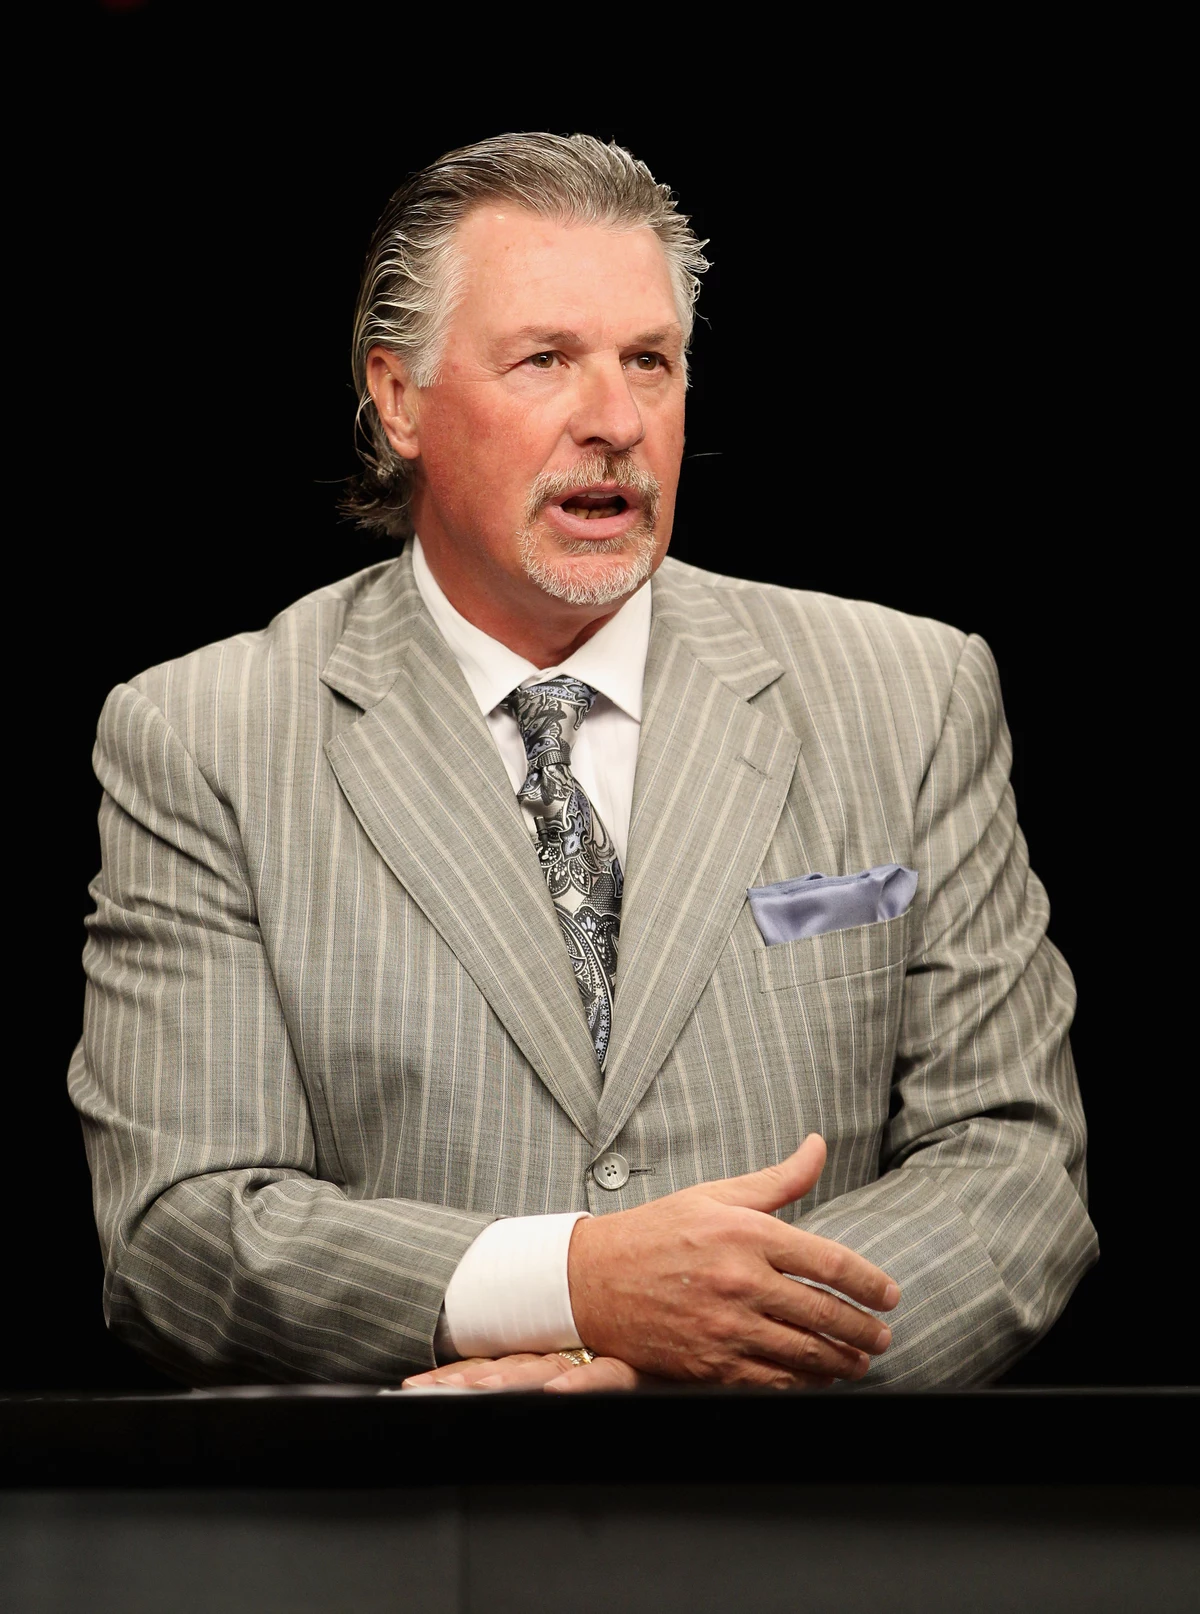 ESPN's Barry Melrose Shares Epic Story of Working on ESPN Campus [AUDIO]